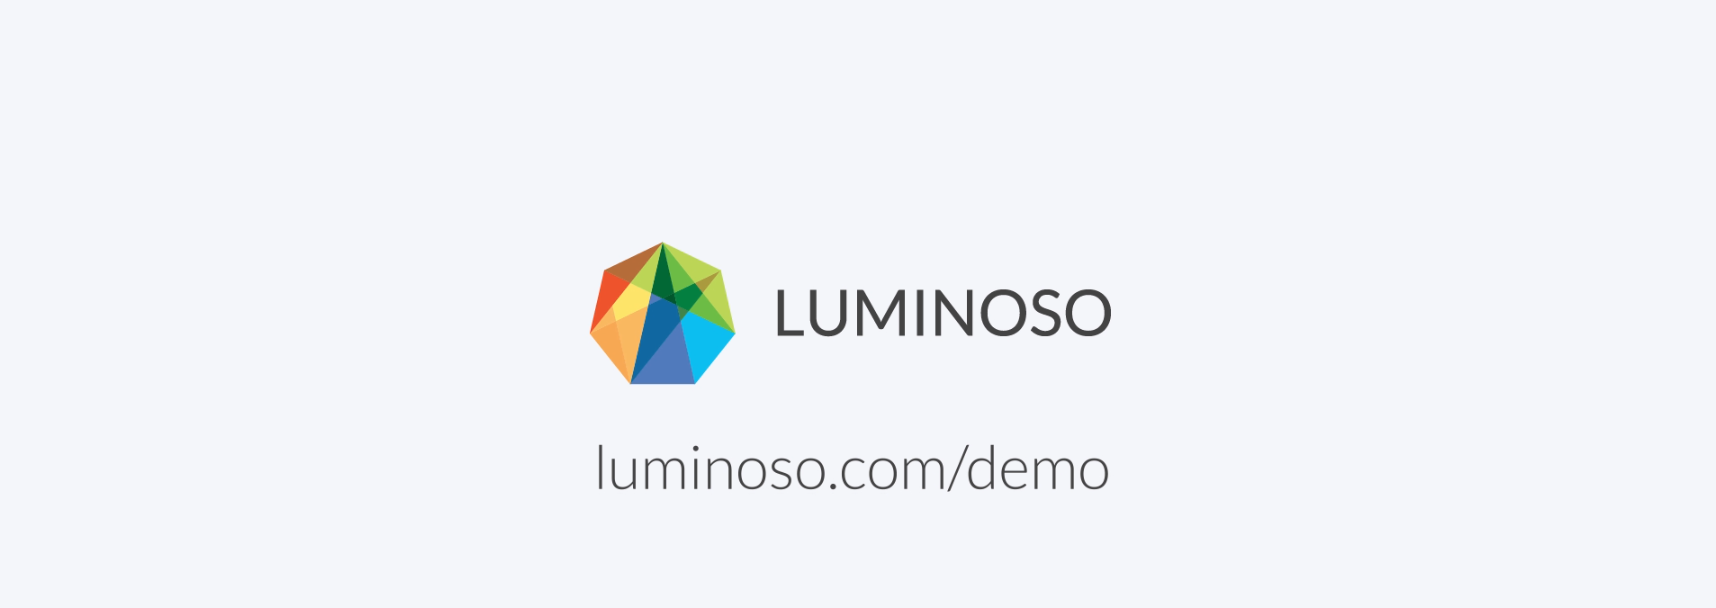 Luminoso Overview Video Cover - Luminoso Overview Video